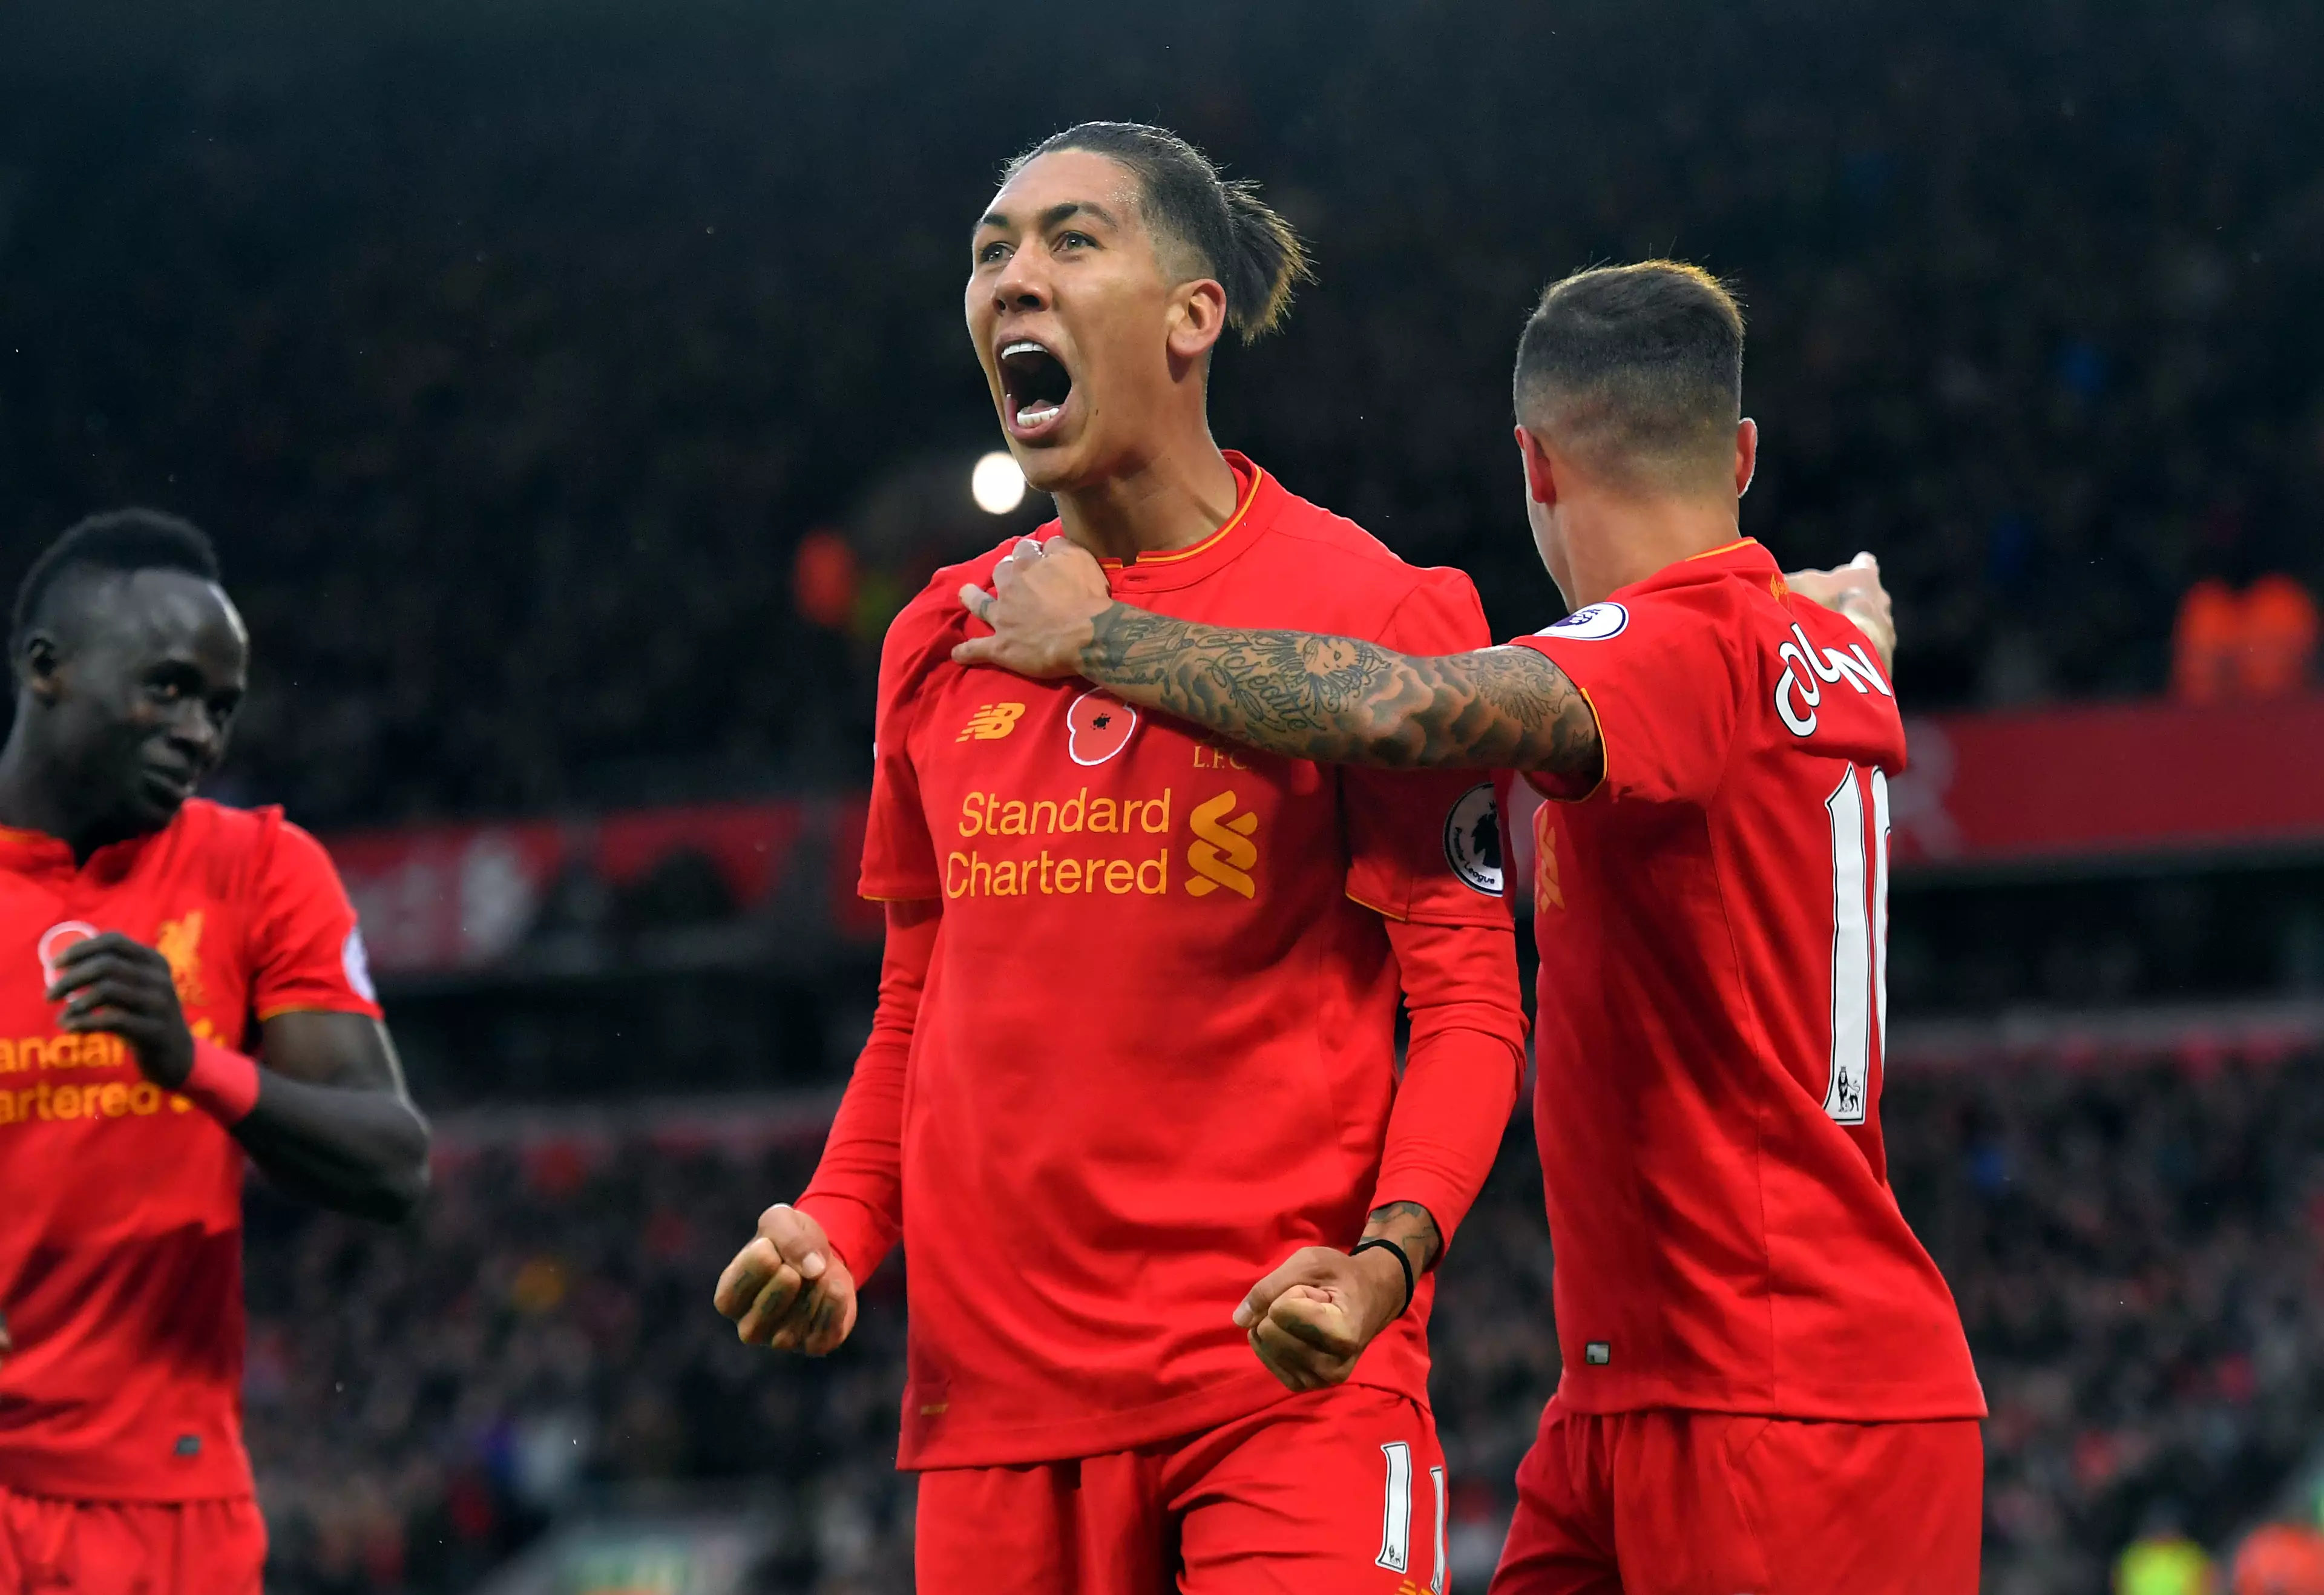 Coutinho and Firmino celebrate. (Image